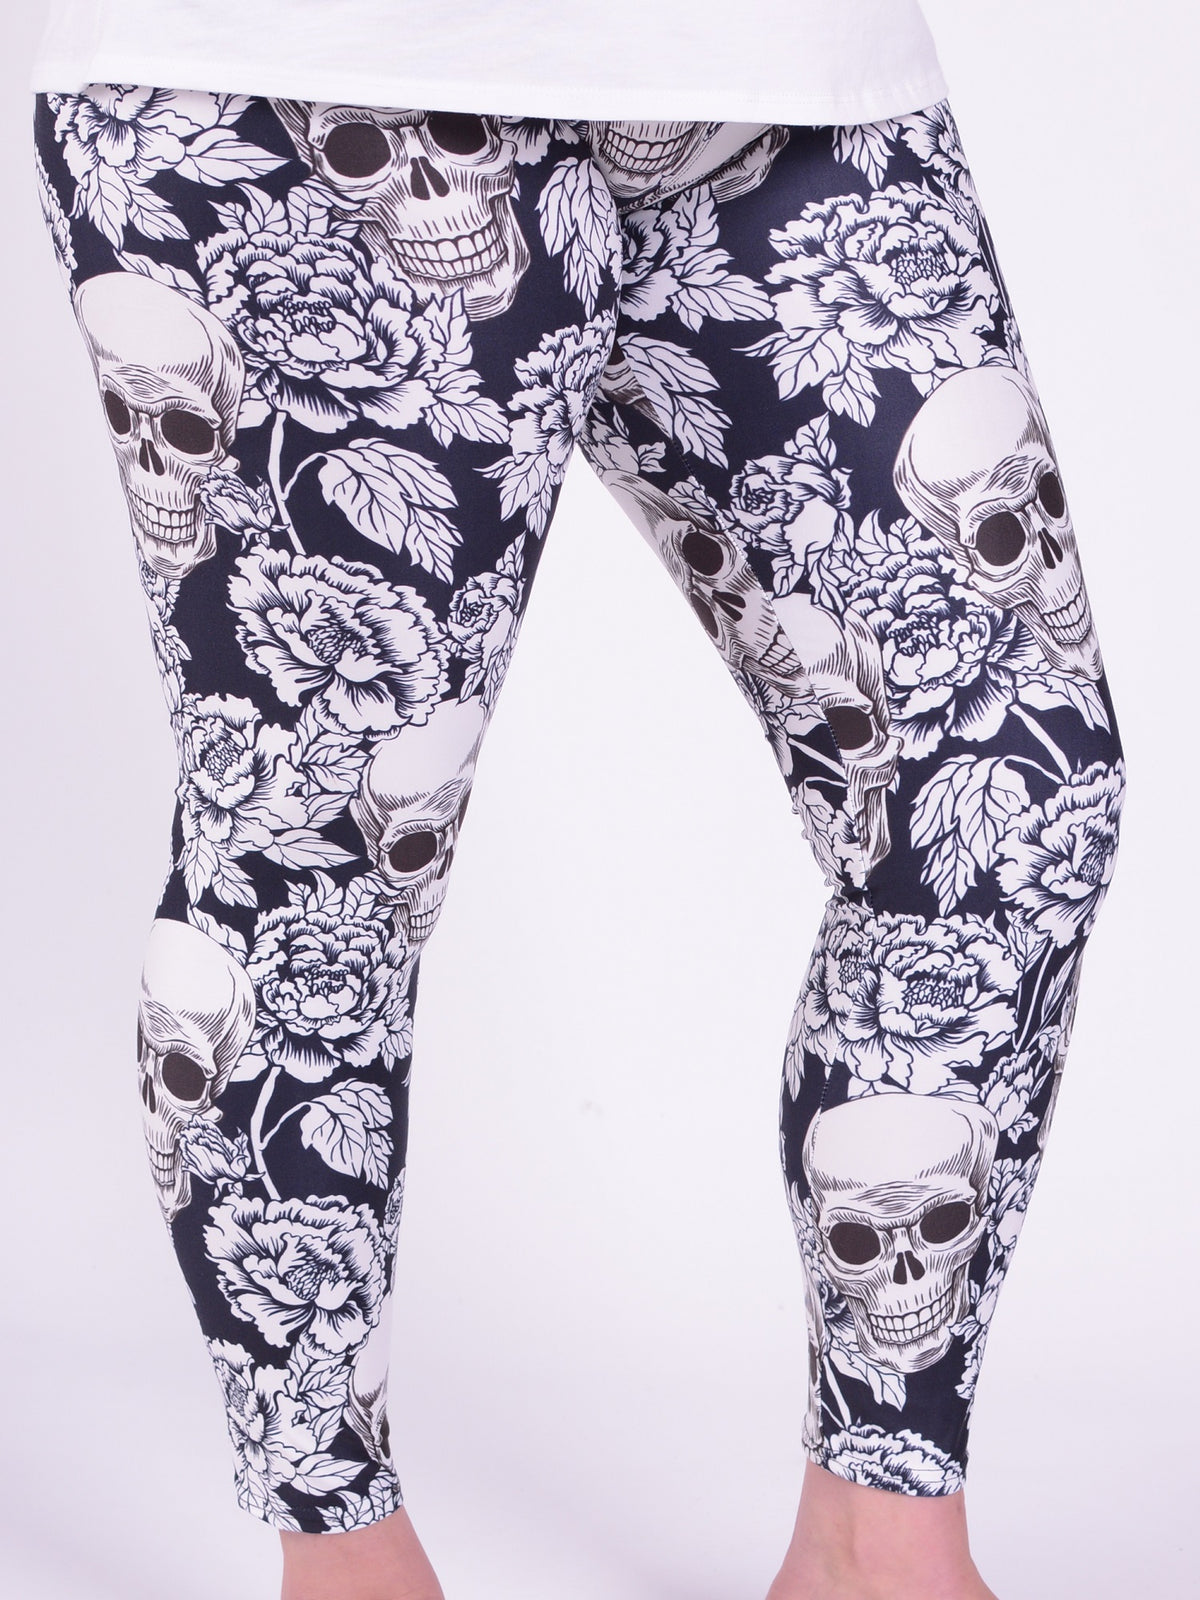 Leggings  - Black and White Skulls - L53, Trousers, Pure Plus Clothing, Lagenlook Clothing, Plus Size Fashion, Over 50 Fashion